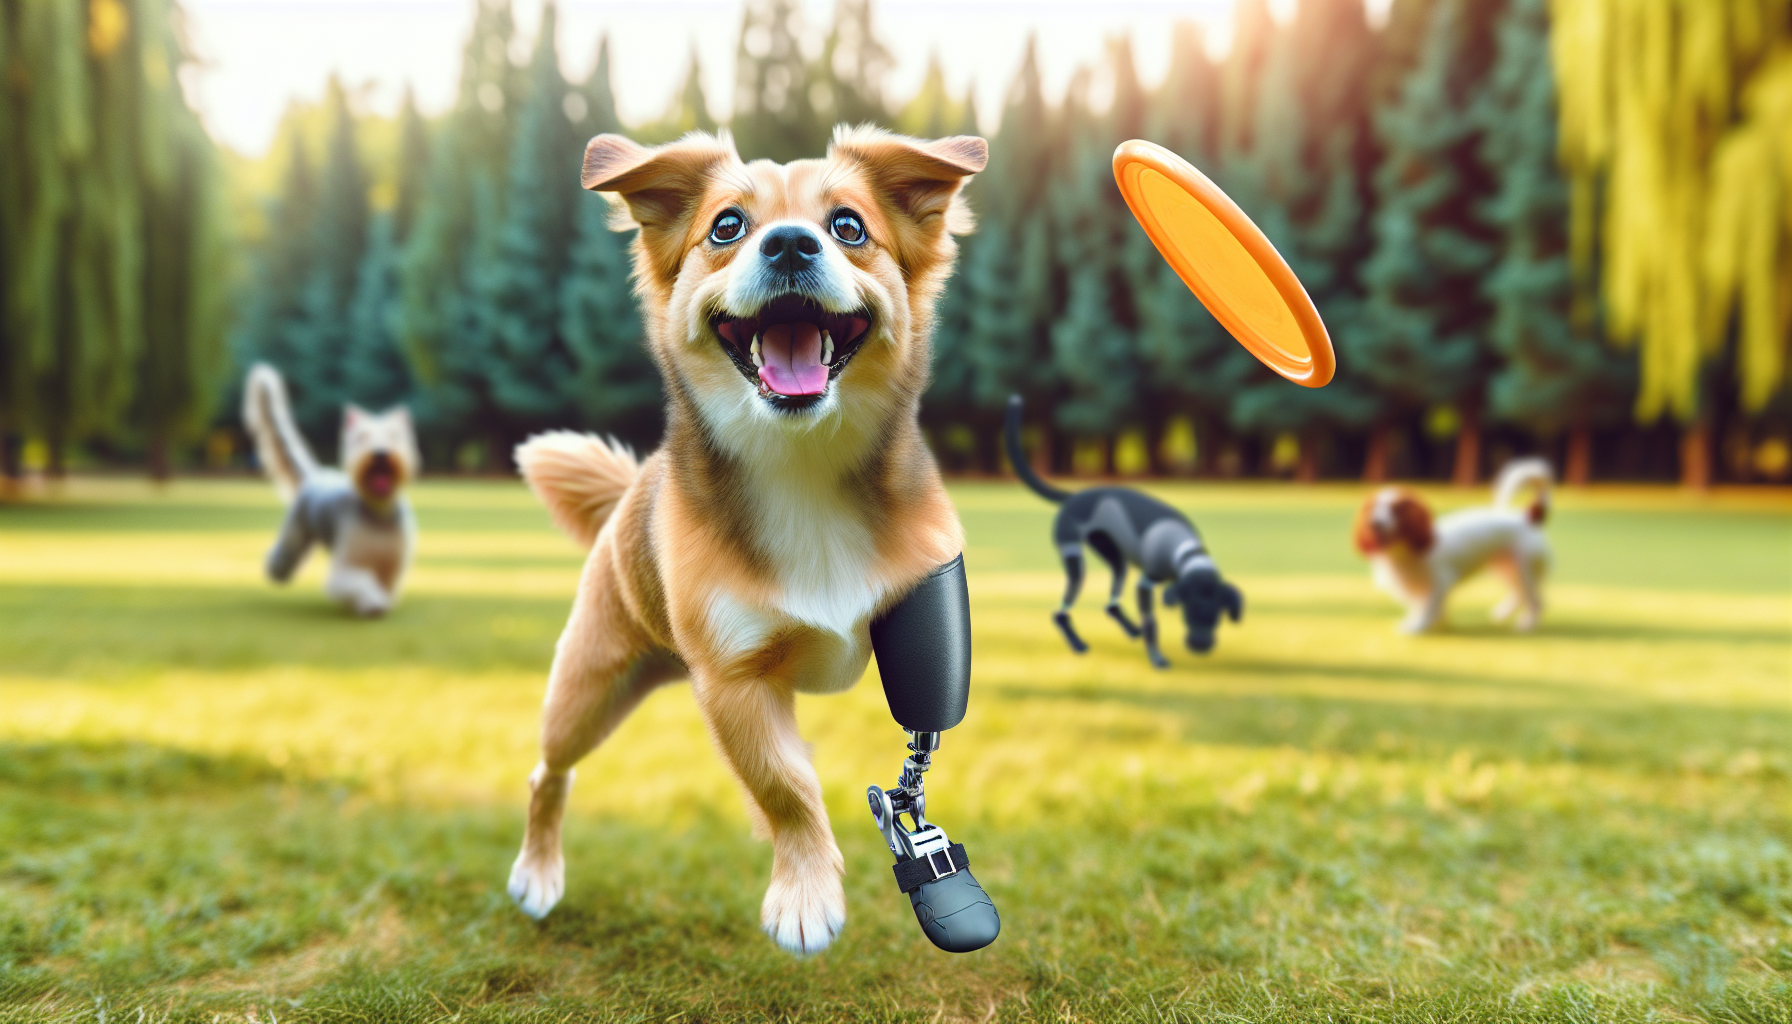 AI generated image of a dog wearing a prosthetic socket and foot running outdoors